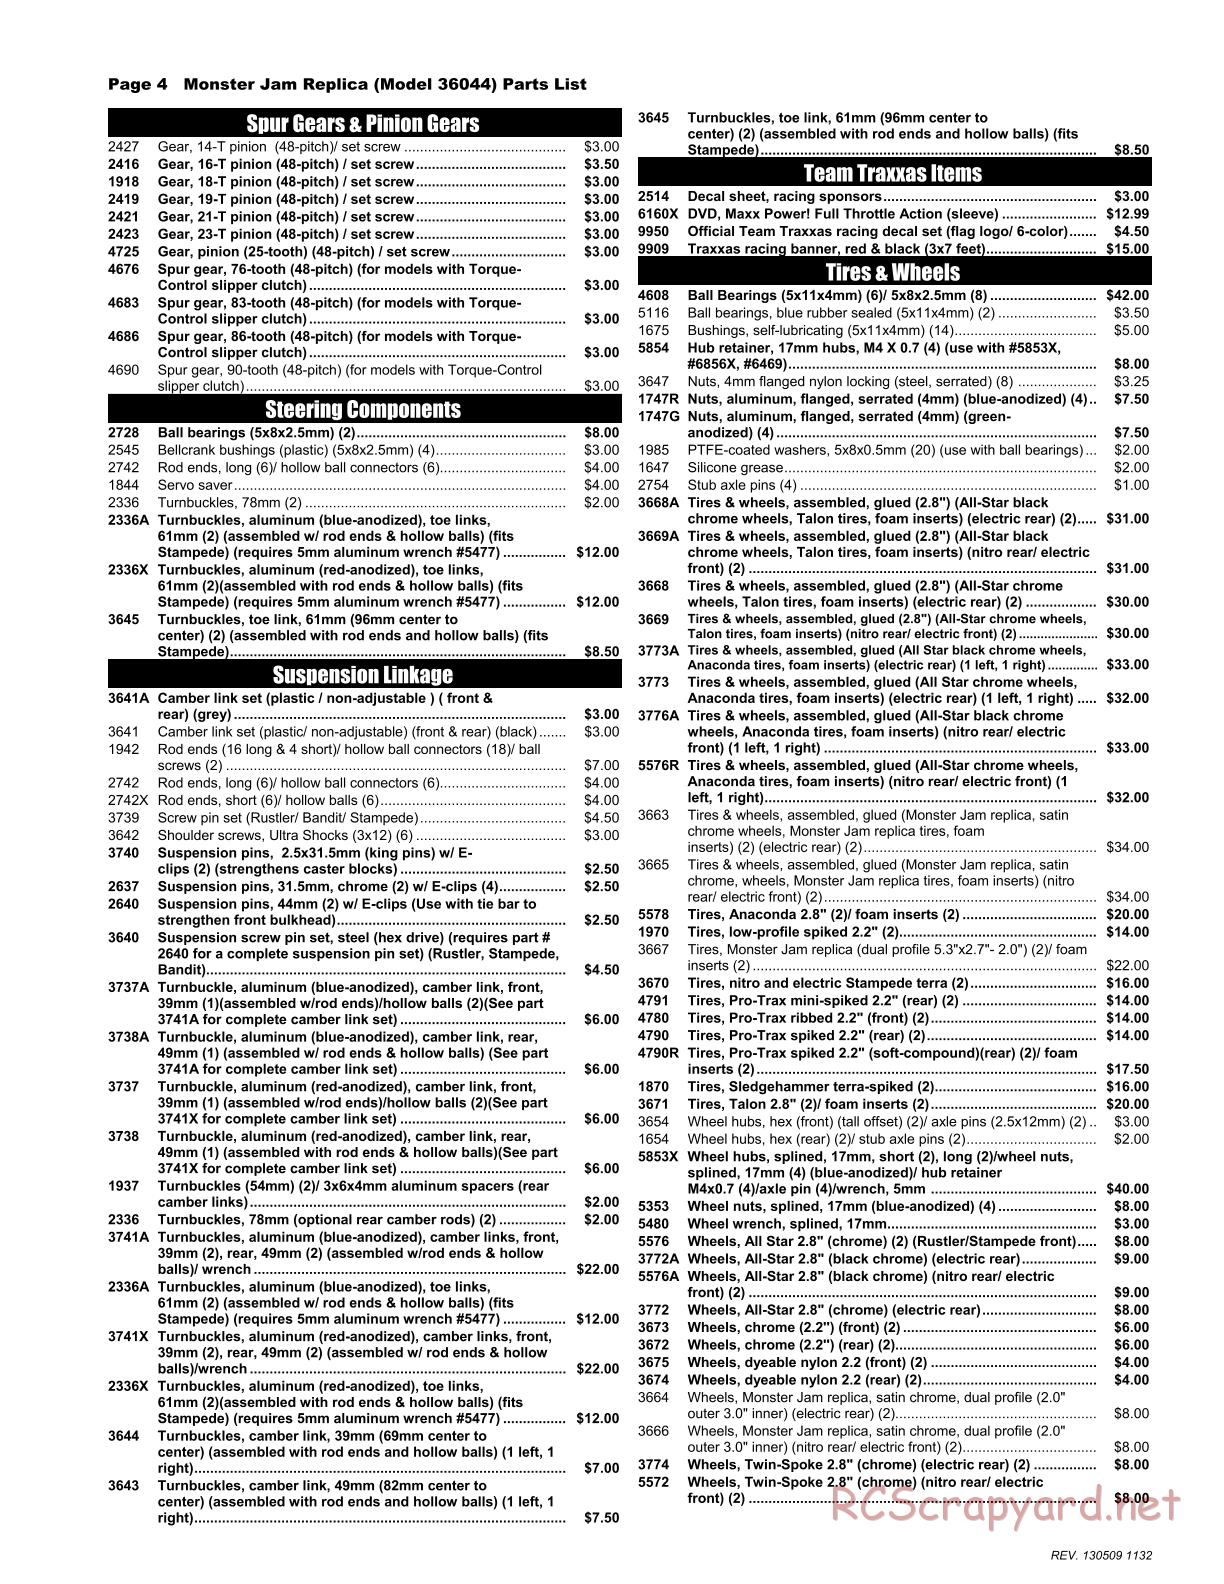 Traxxas - Monster Jam - Son-Uva Digger - Parts List - Page 4